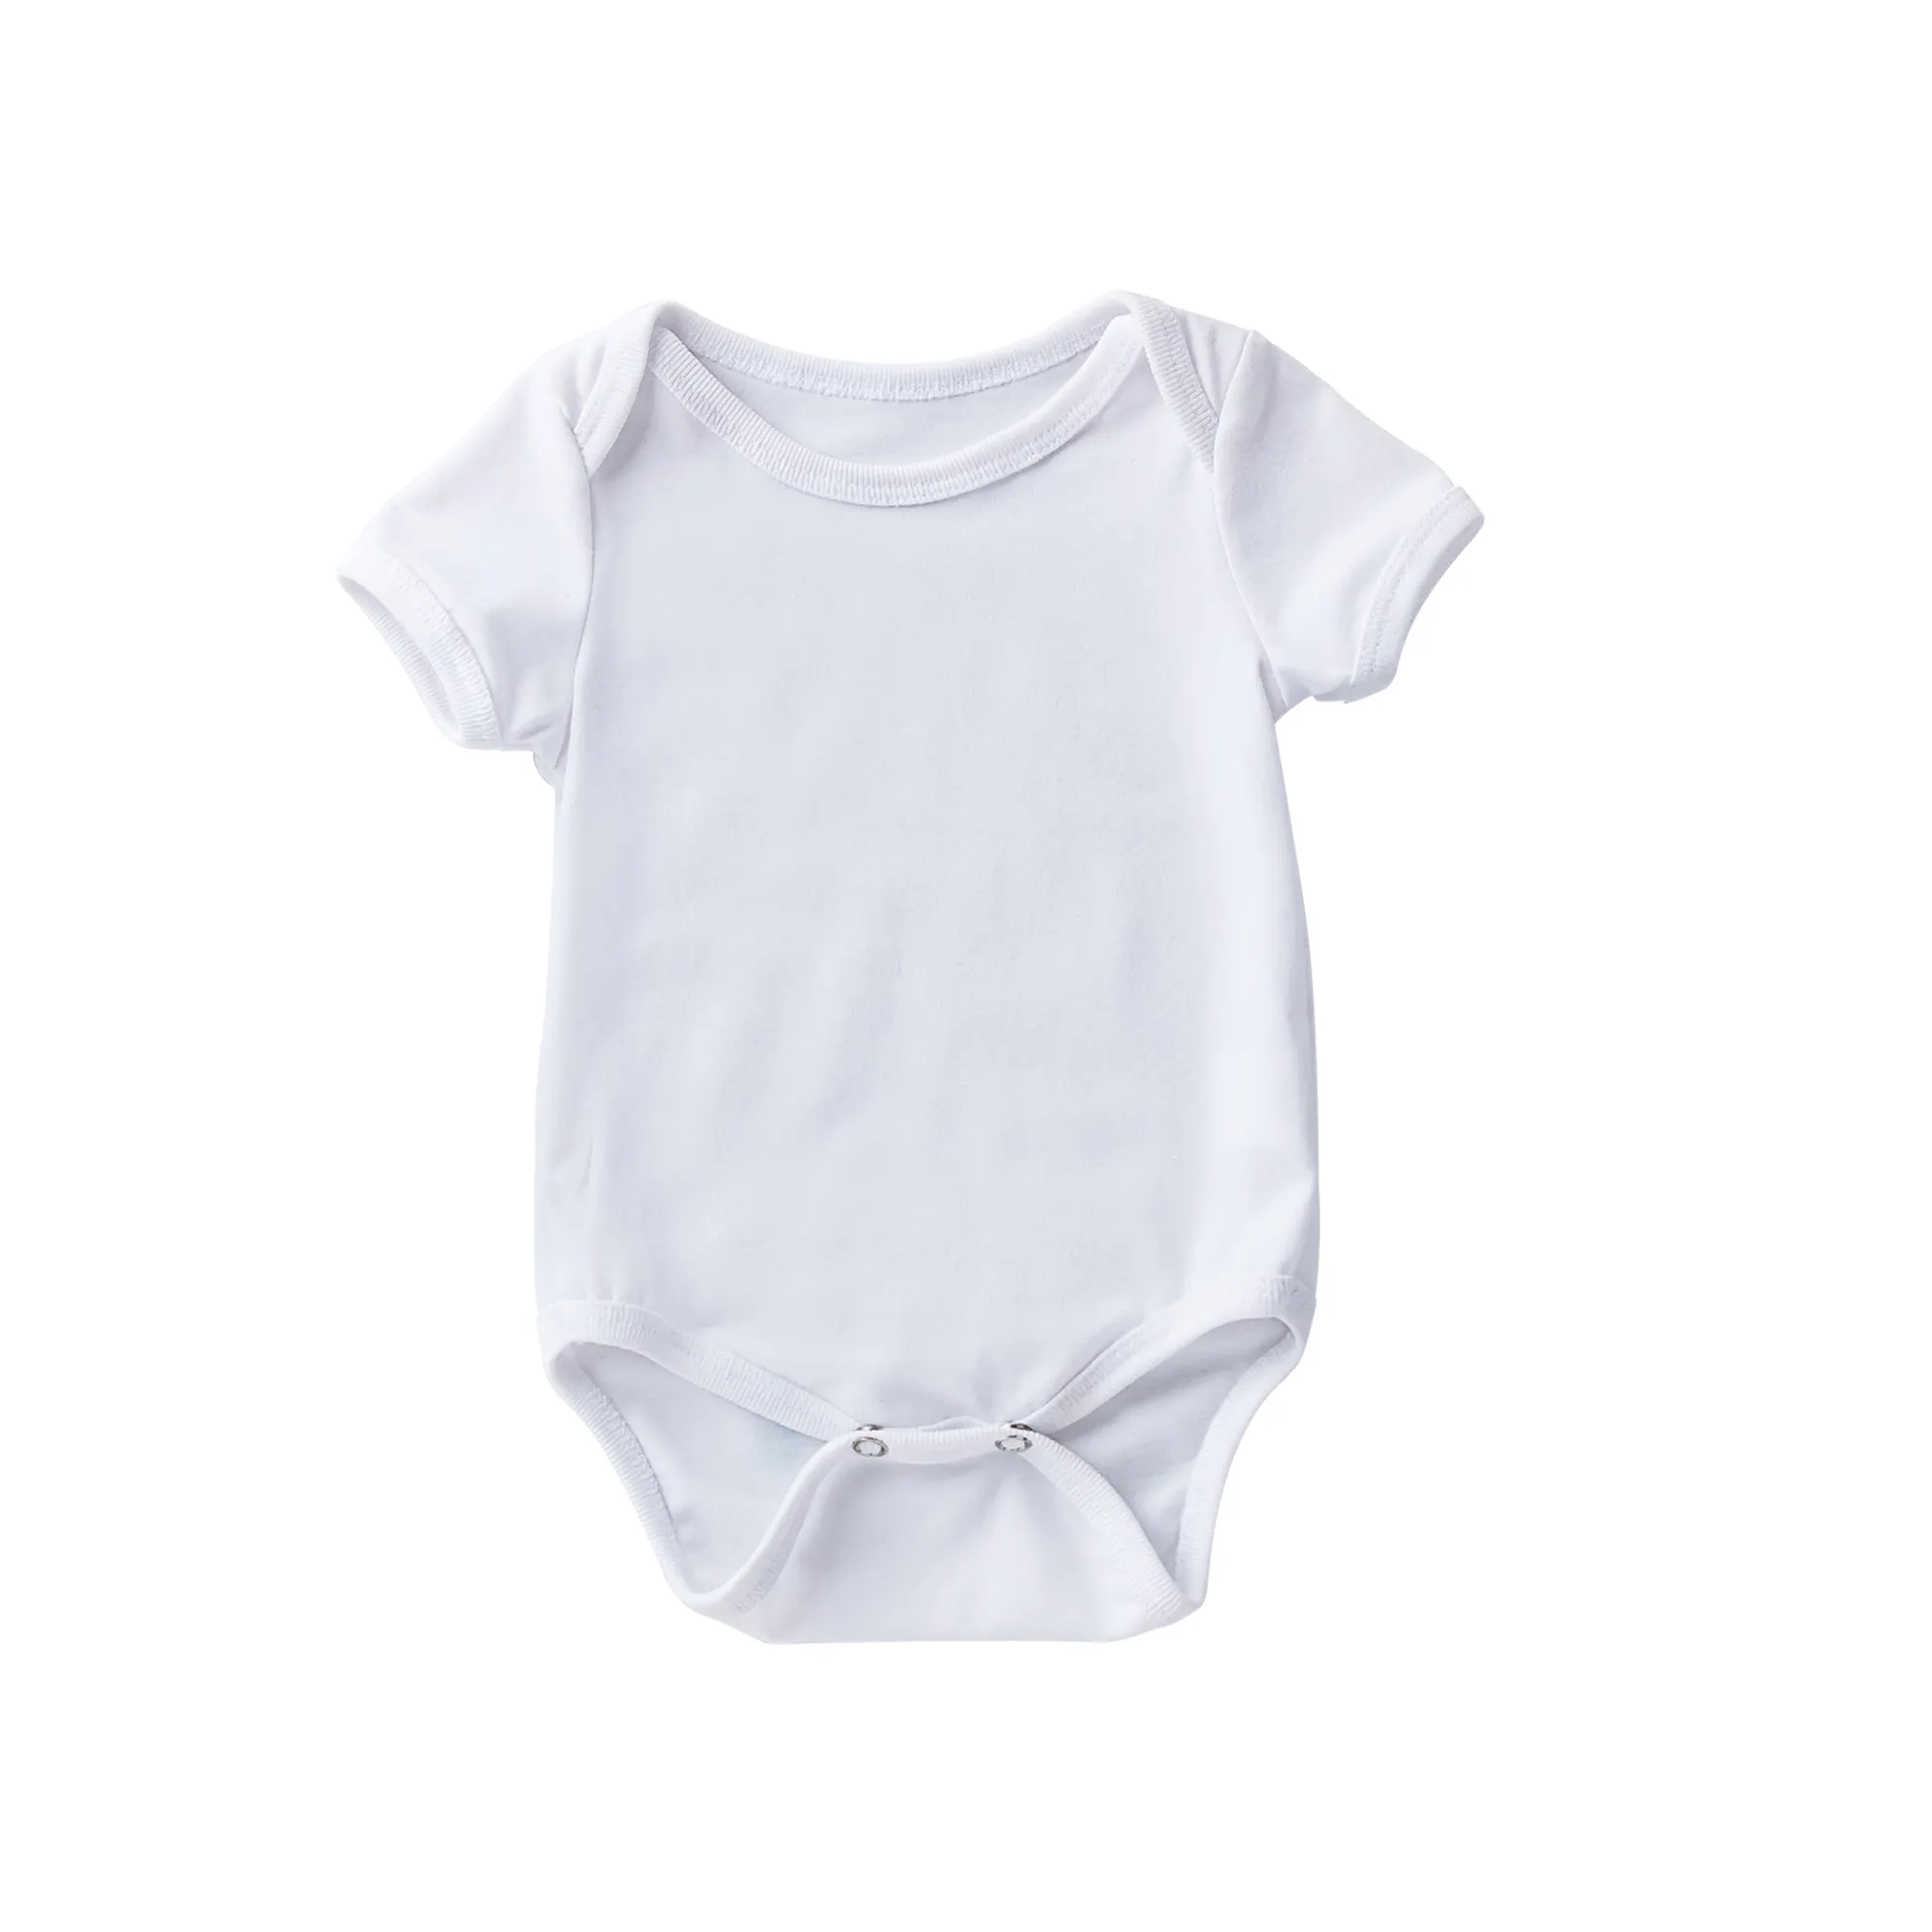 Wholesale Babany bebe Unisex Baby Bodysuit Boys & Girls Pure White Blank Rompers 100% Cotton Solid Color Short Sleeve